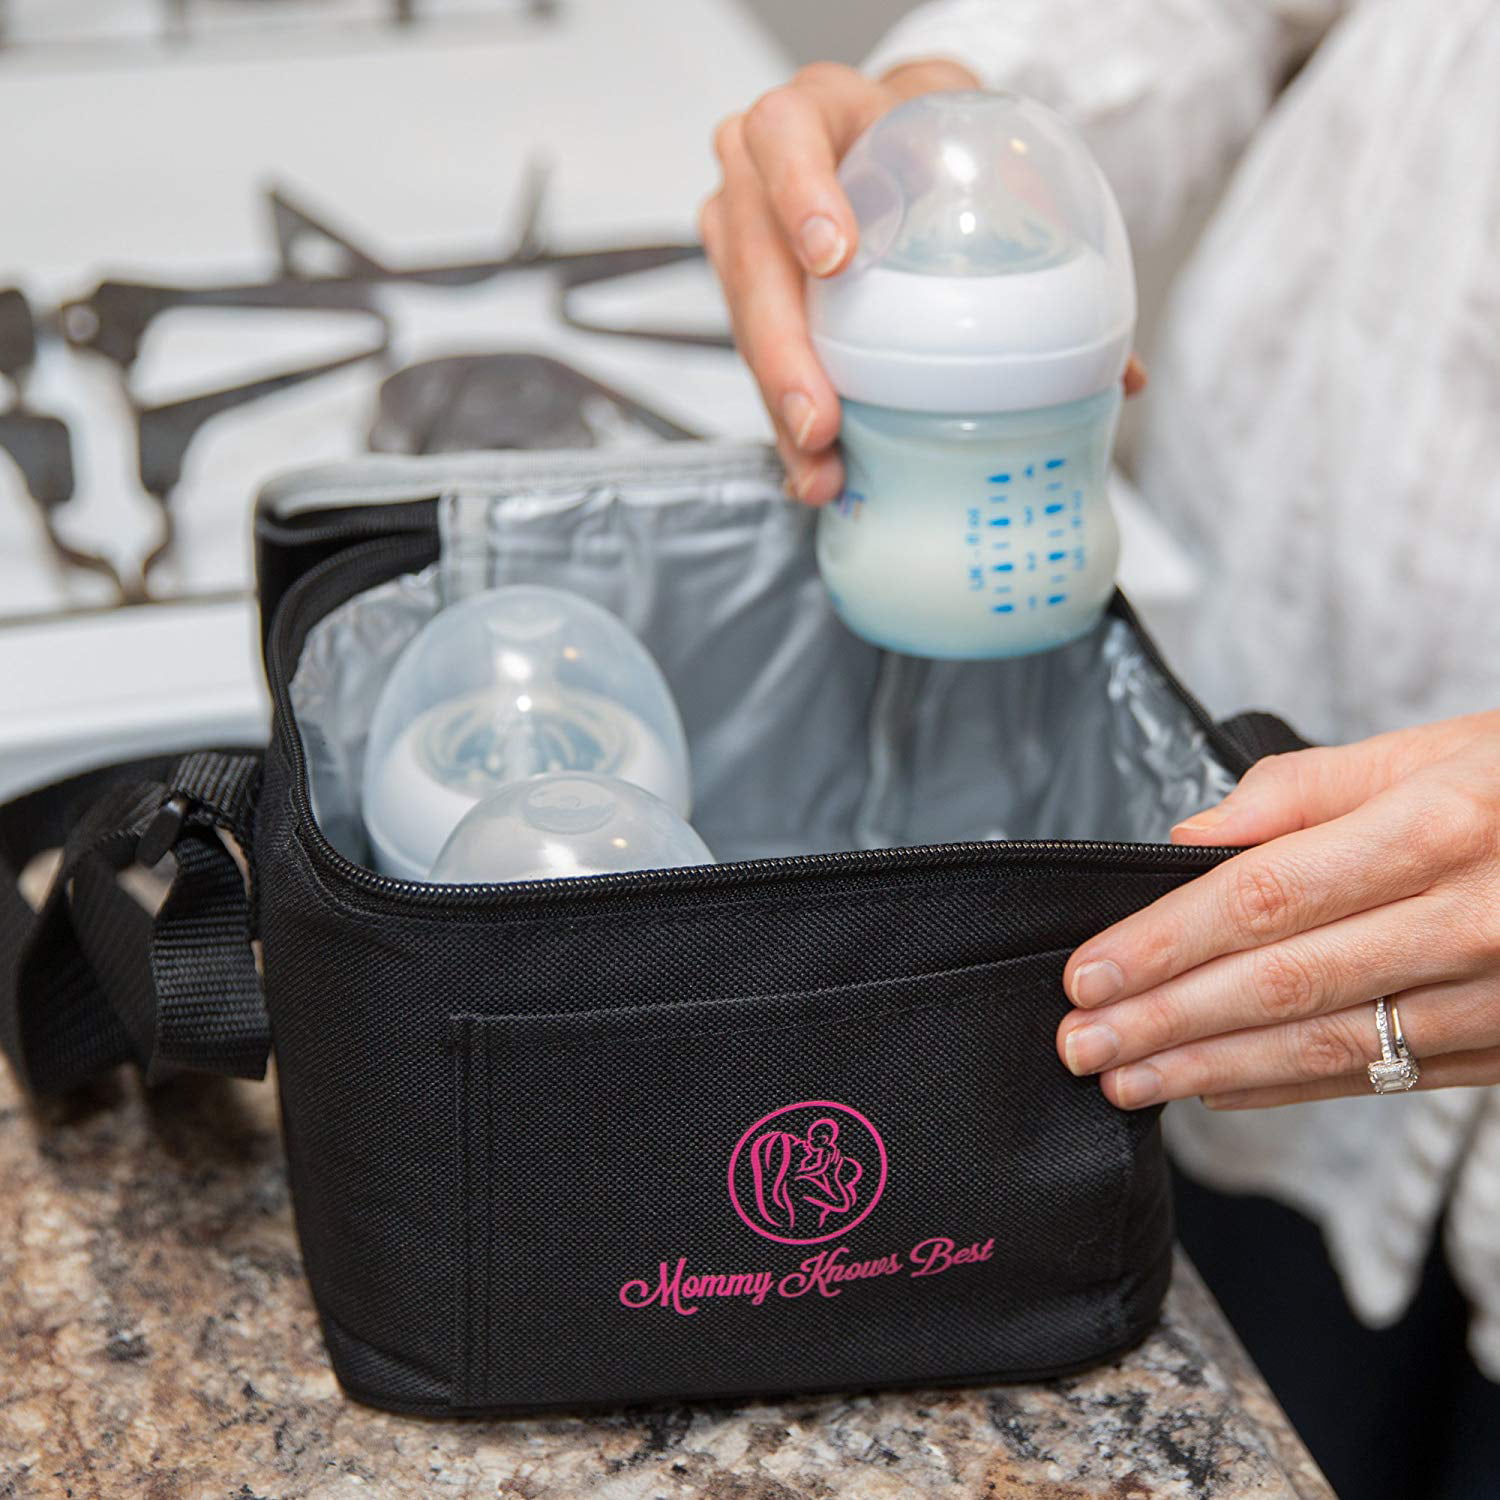 Mila's Keeper Insulated Portable Breast Milk Cooler